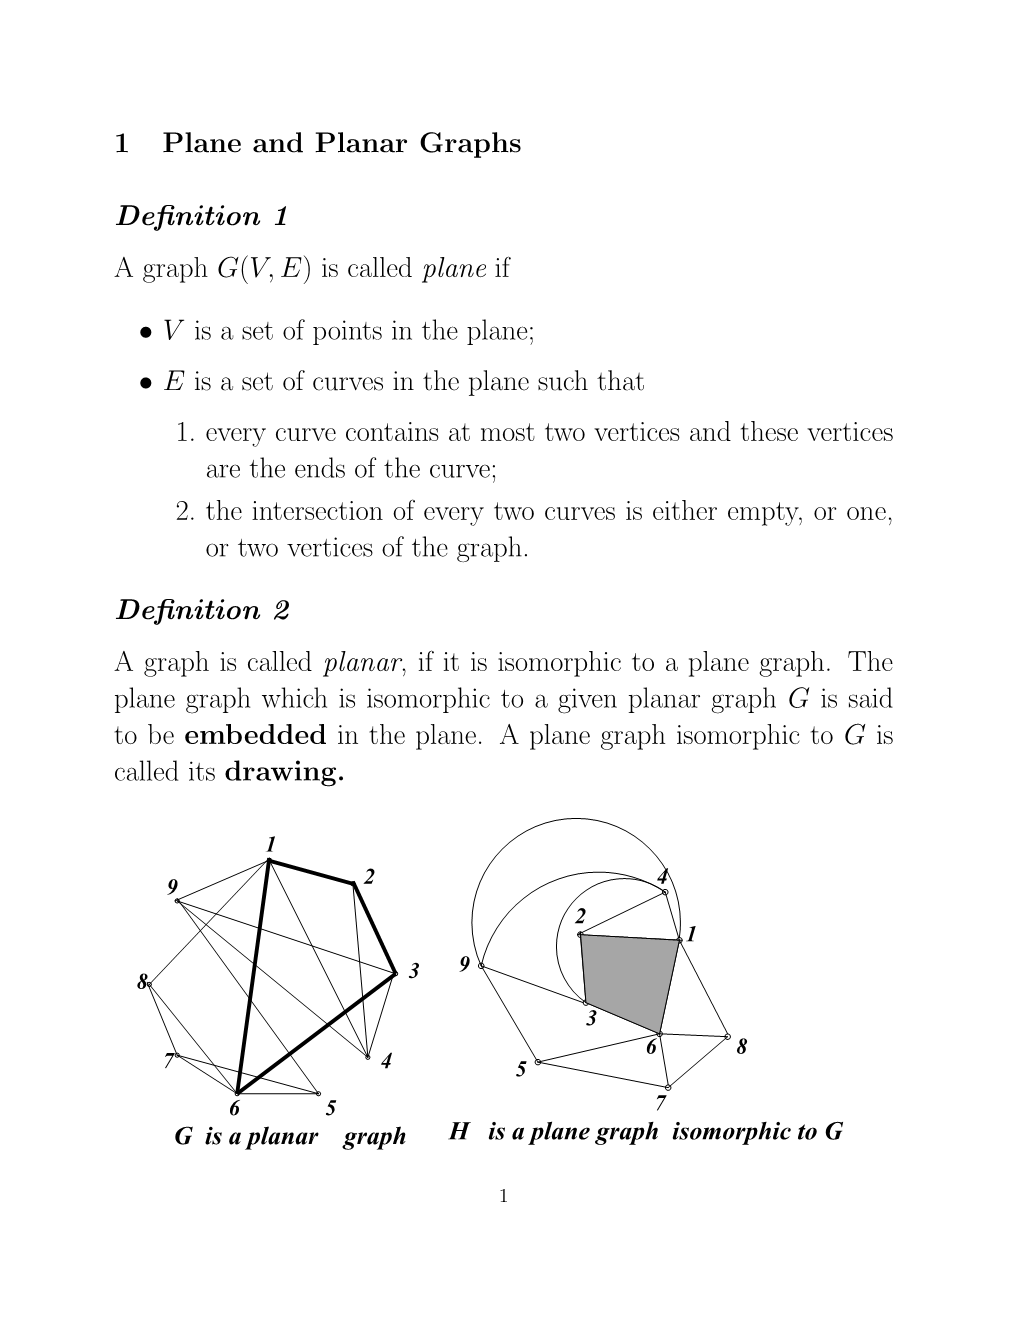 1 Plane and Planar Graphs Definition 1 a Graph G(V,E) Is Called Plane If • V Is a Set of Points in the Plane; • E Is a Set O